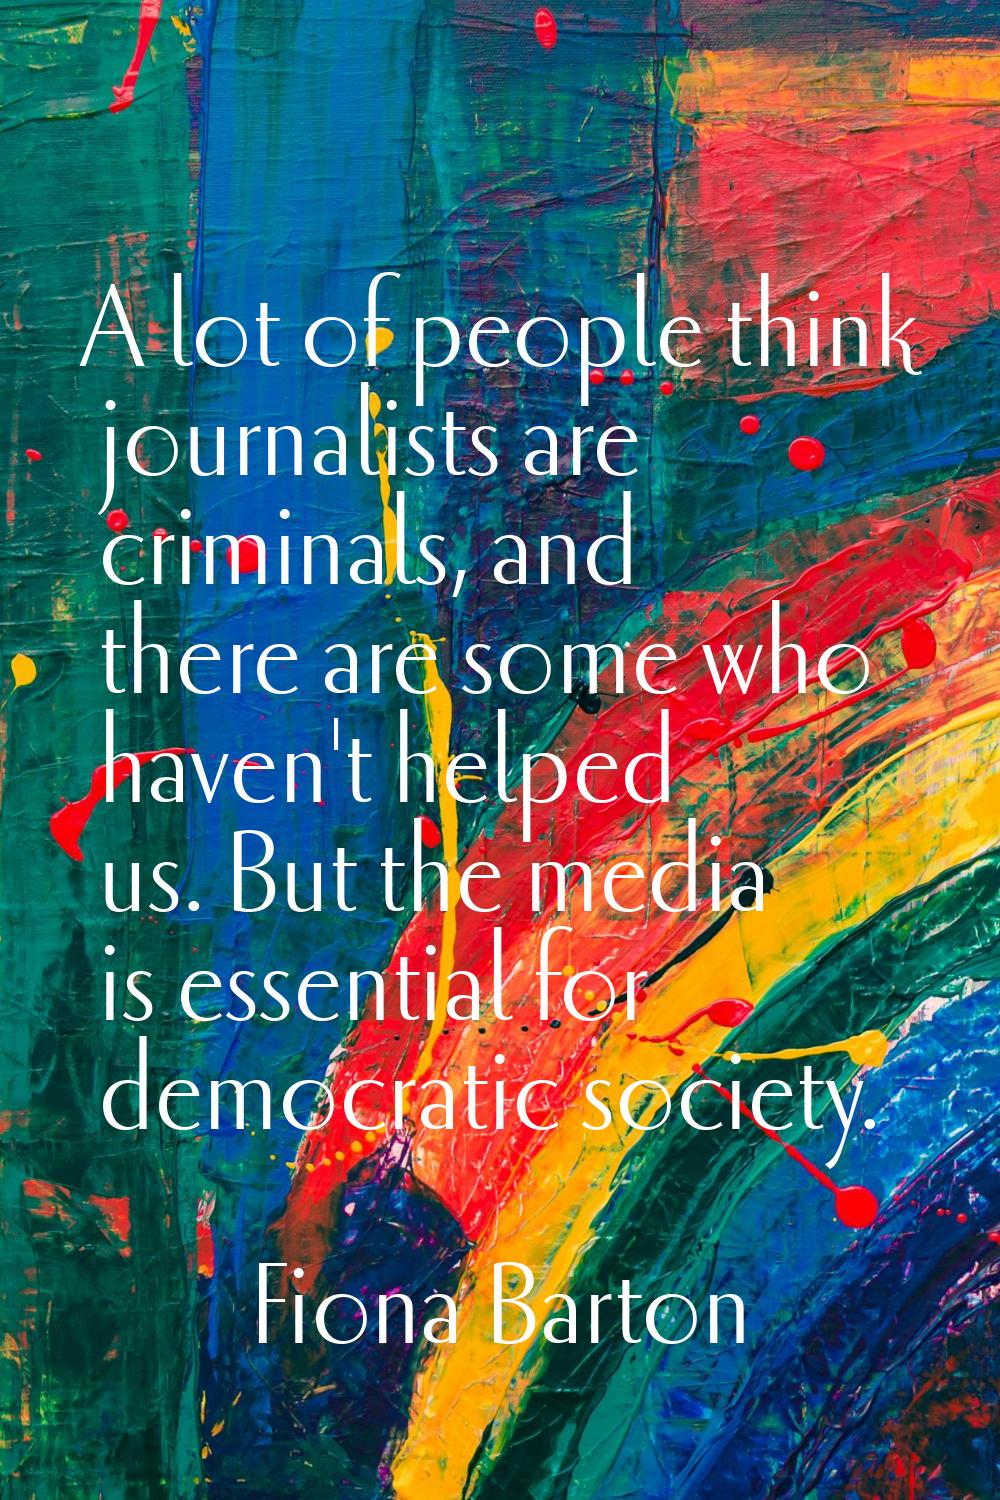 A lot of people think journalists are criminals, and there are some who haven't helped us. But the 